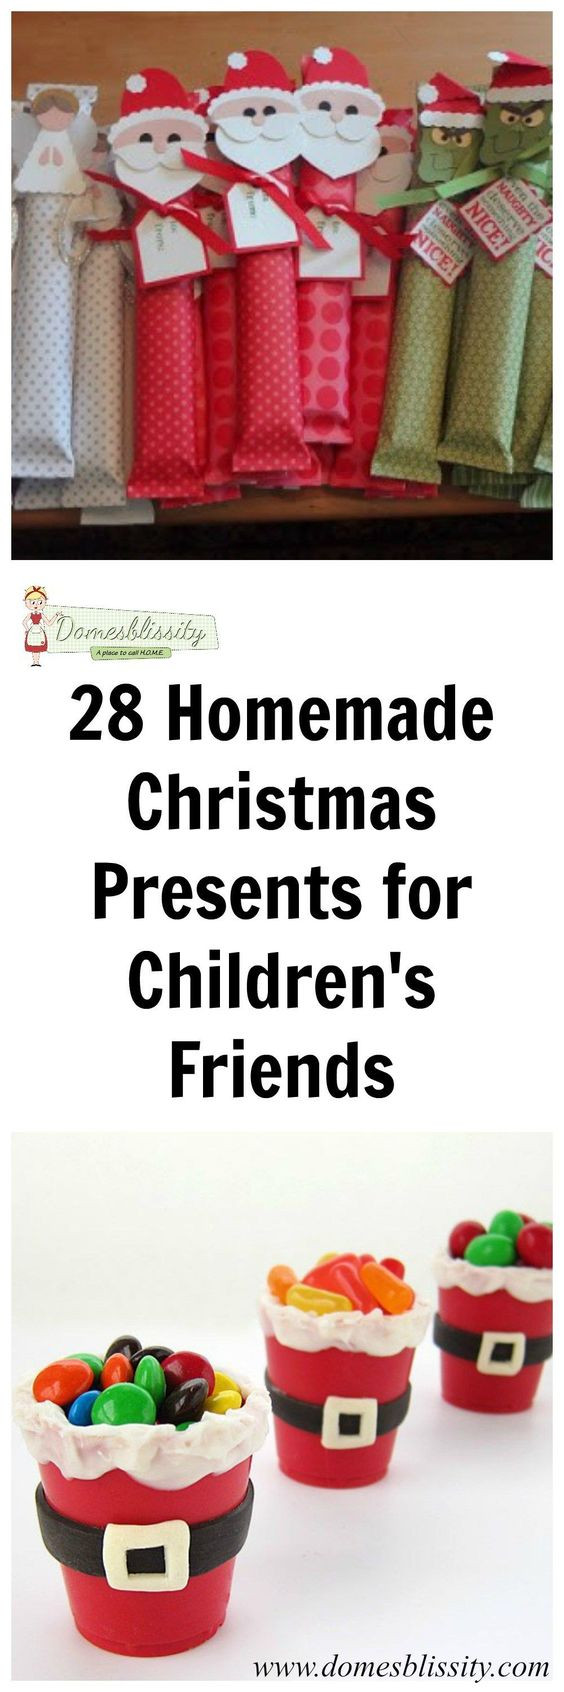 Friends Christmas Gift
 Last week I shared with you 21 homemade Christmas presents